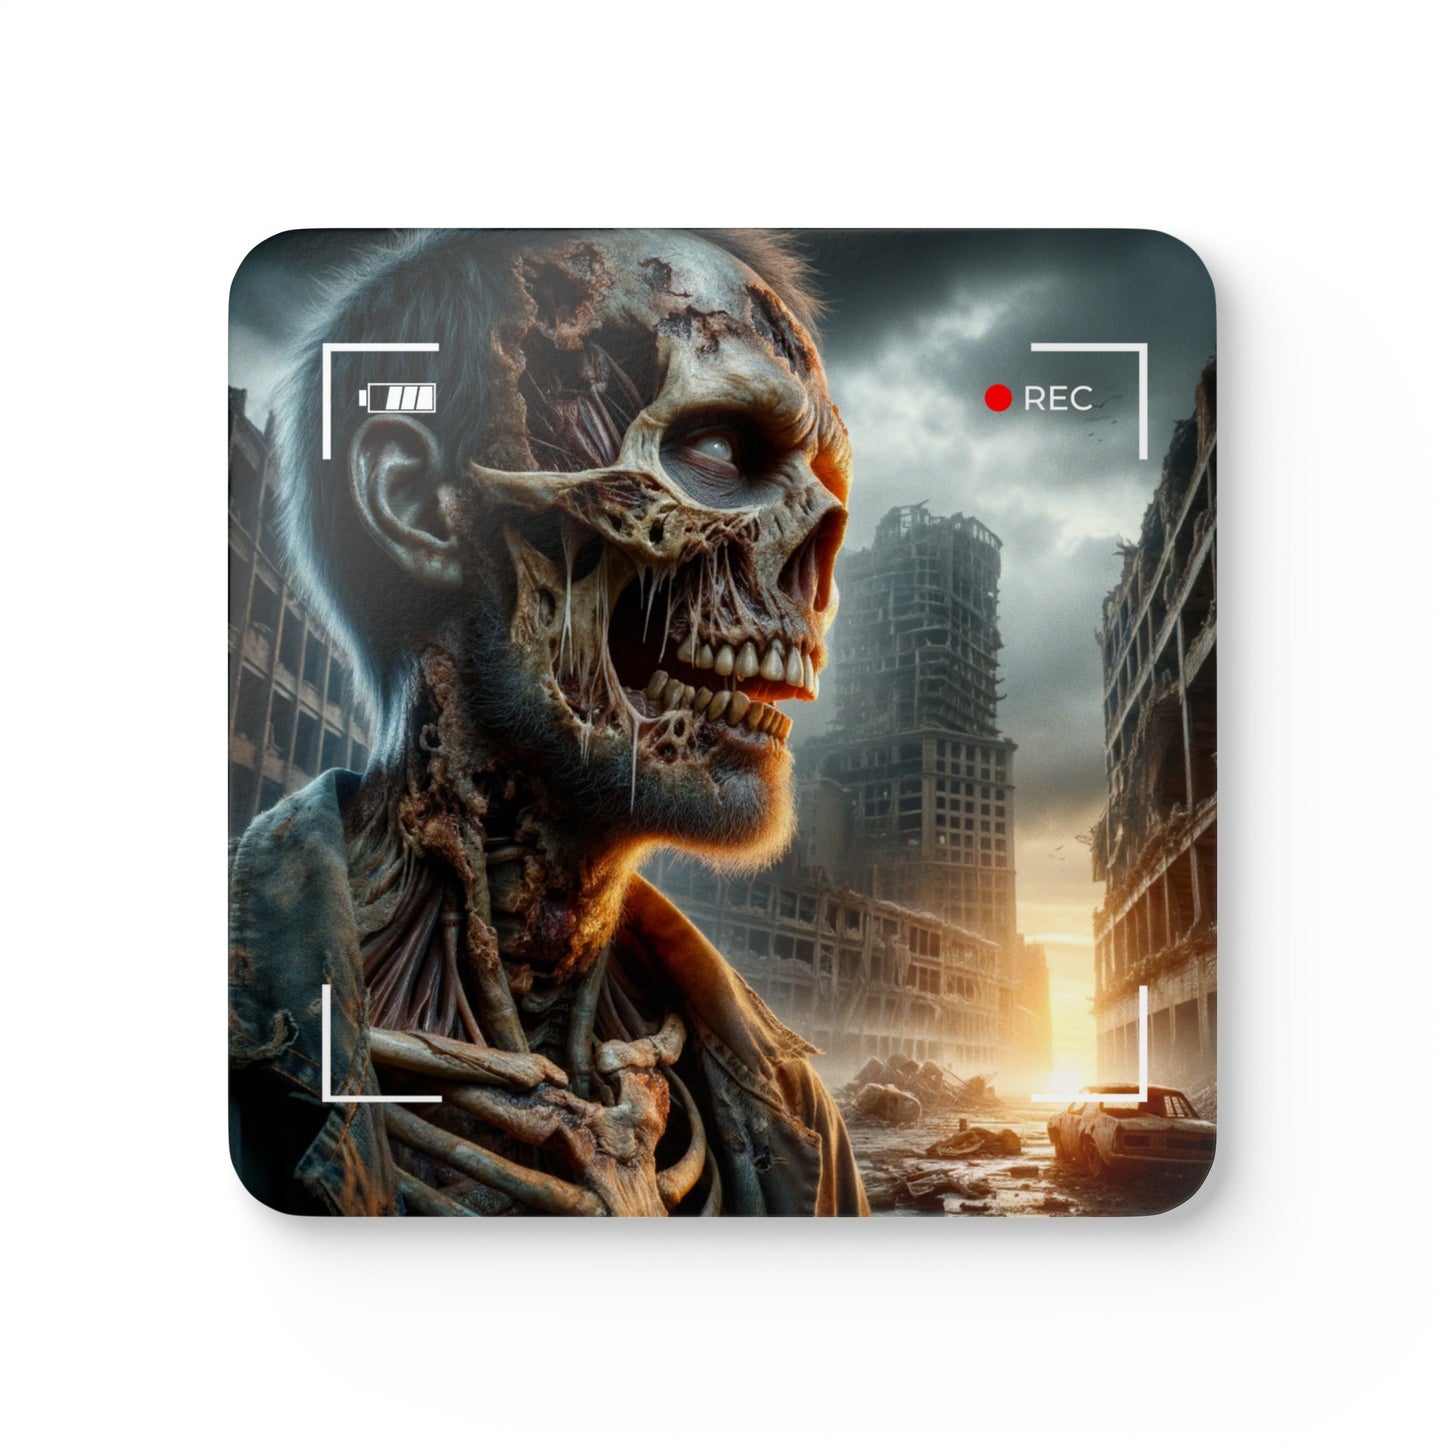 Chronicles of the Undead - Corkwood Coaster Set